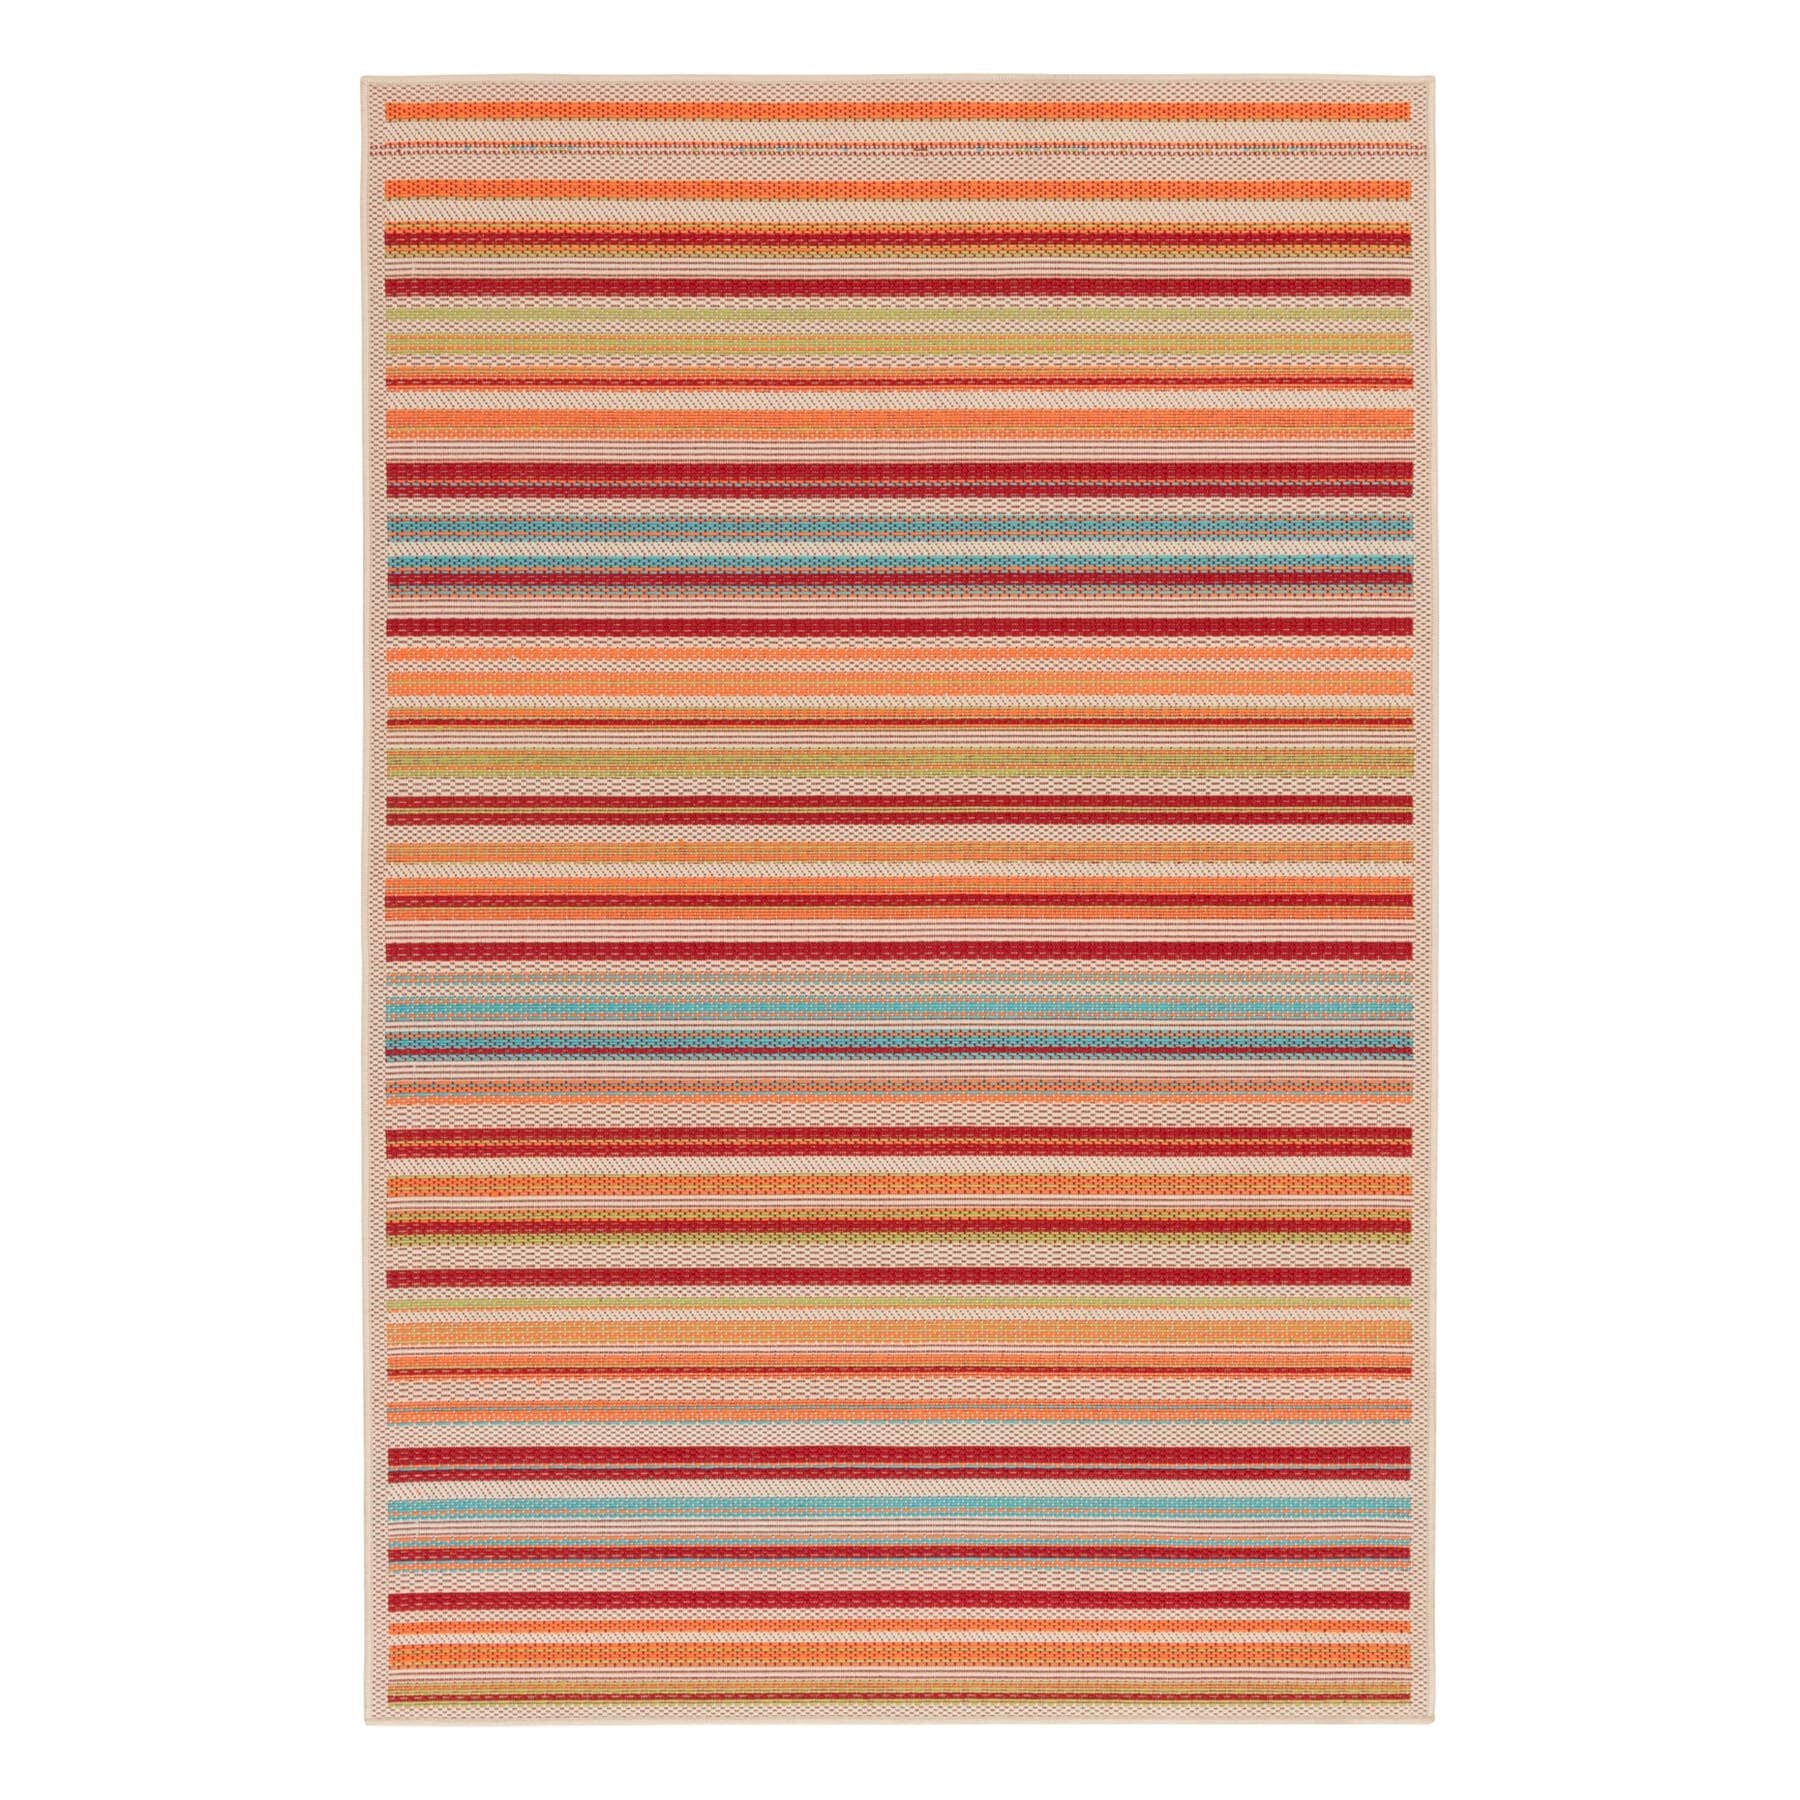 (E309) Scope Multicolor Striped Woven Indoor & Outdoor Area Rug, 8x10 - nybusiness